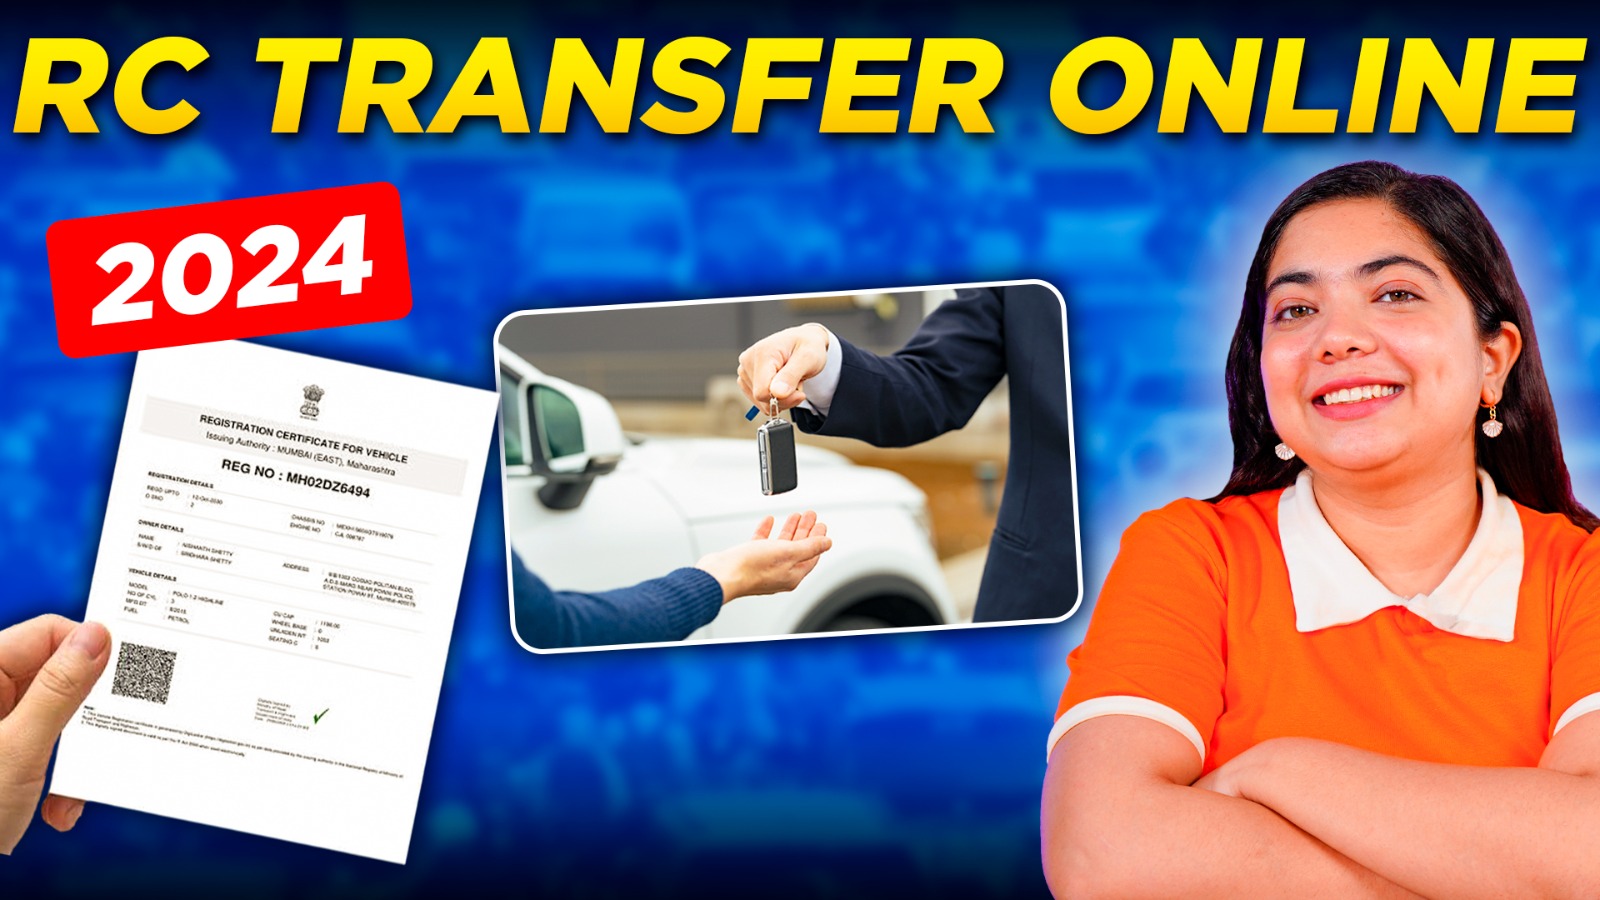 How to transfer RC online 2024   Step-by-step guide